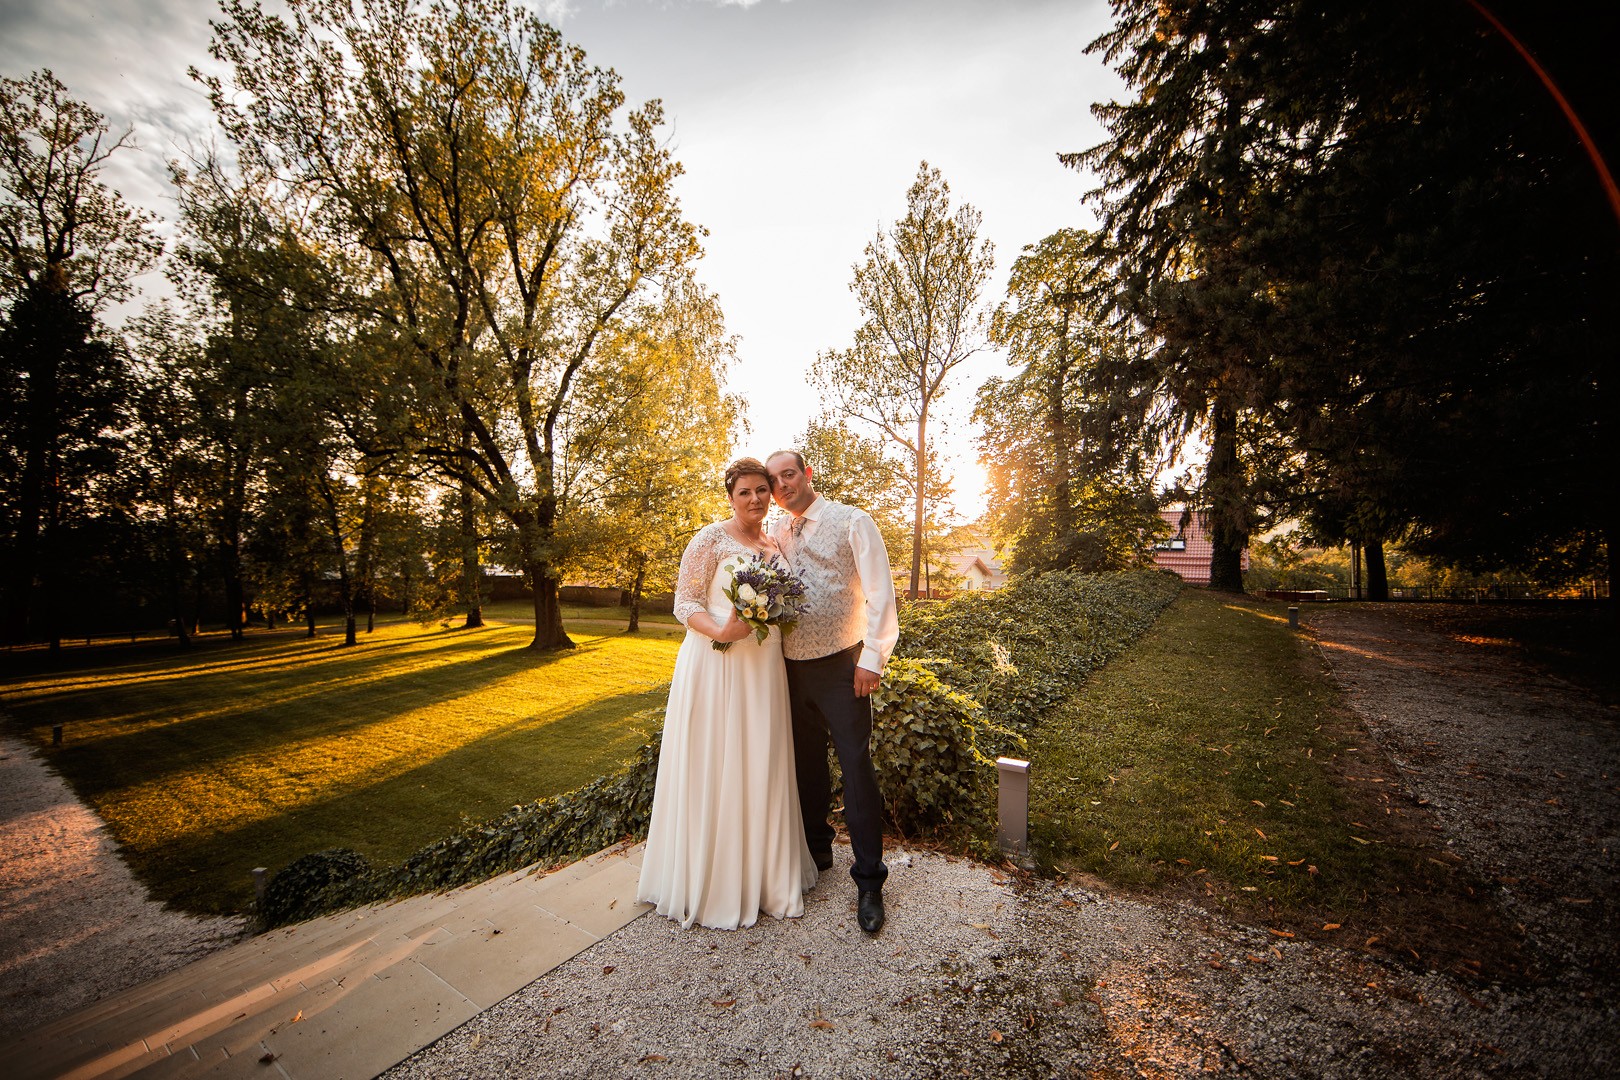 Wedding photos from the Slovak-Italian wedding of Mirka and Baldy in the beautiful surroundings of the Gbeľany Manor House - 0345.jpg